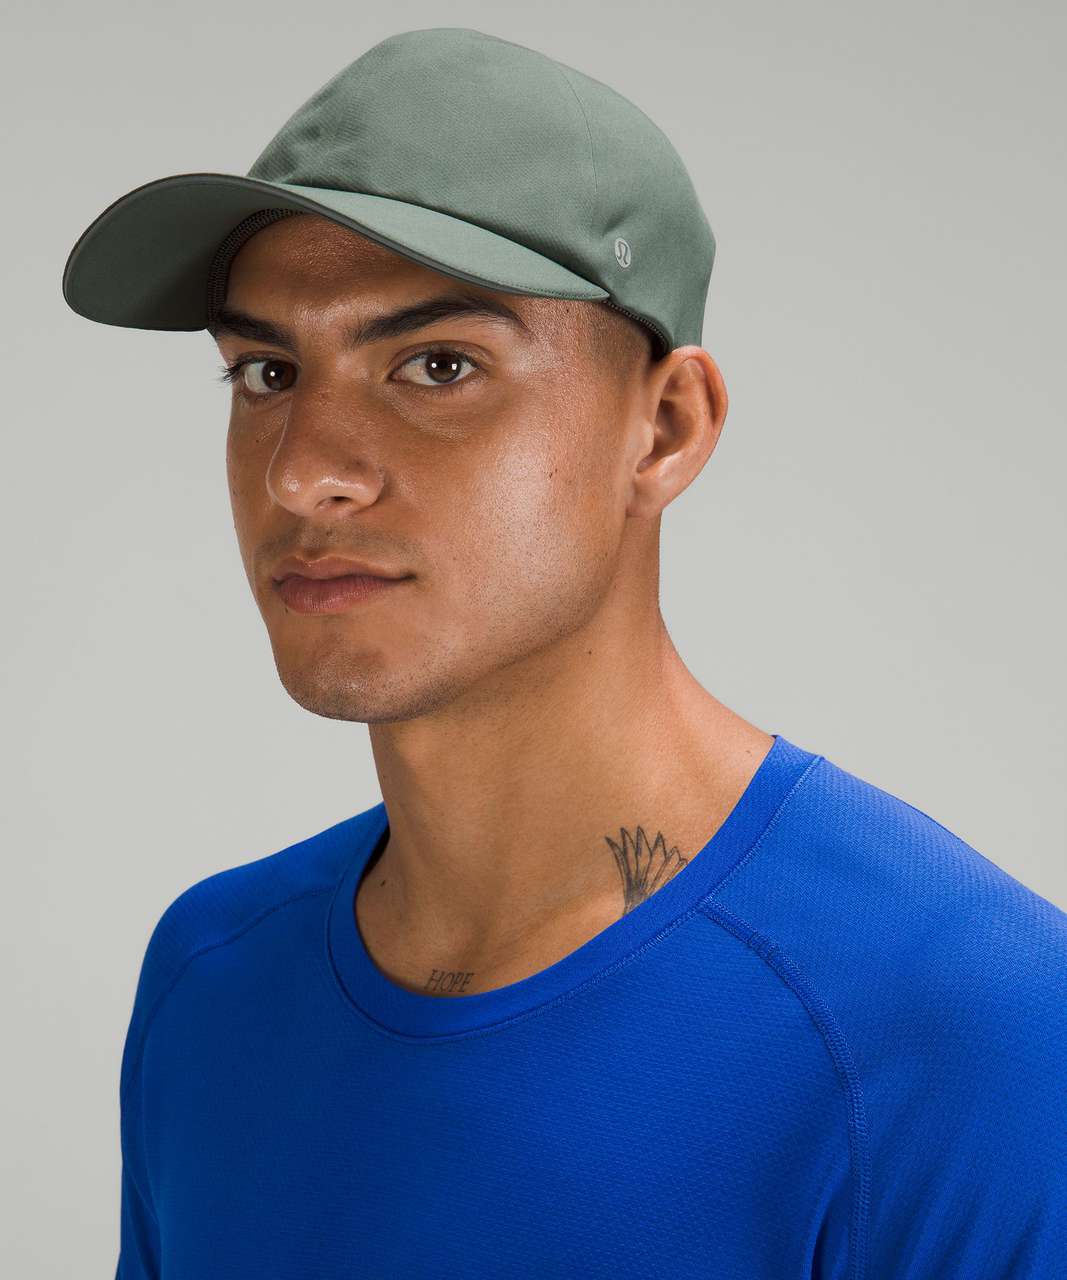 Lululemon Mens Fast and Free Running Hat - Smoked Spruce